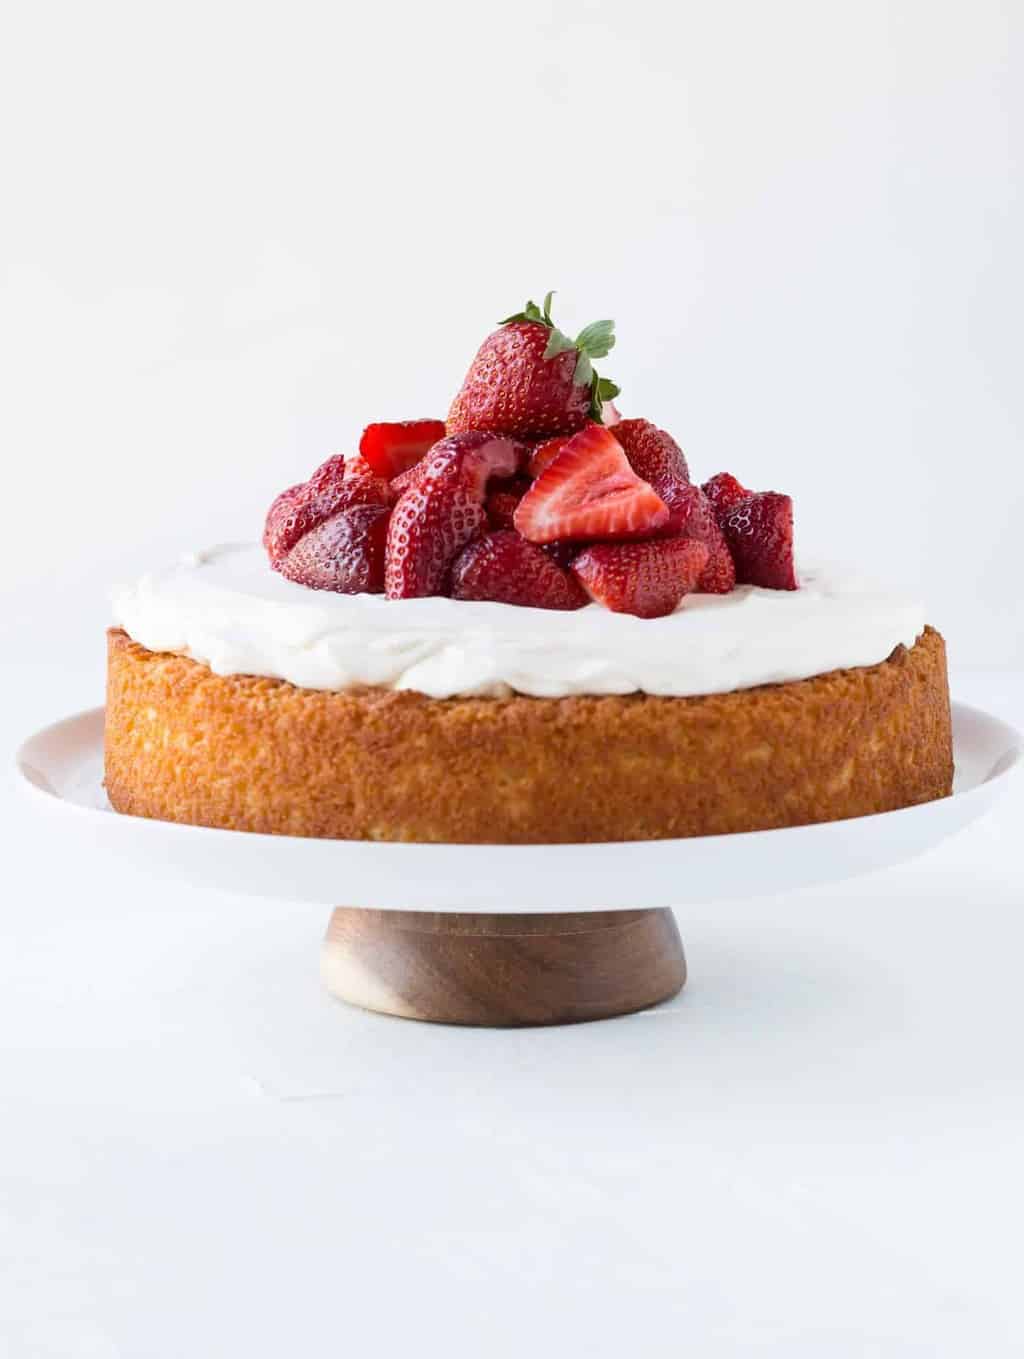 A cake on a platter topped with strawberries and cream.